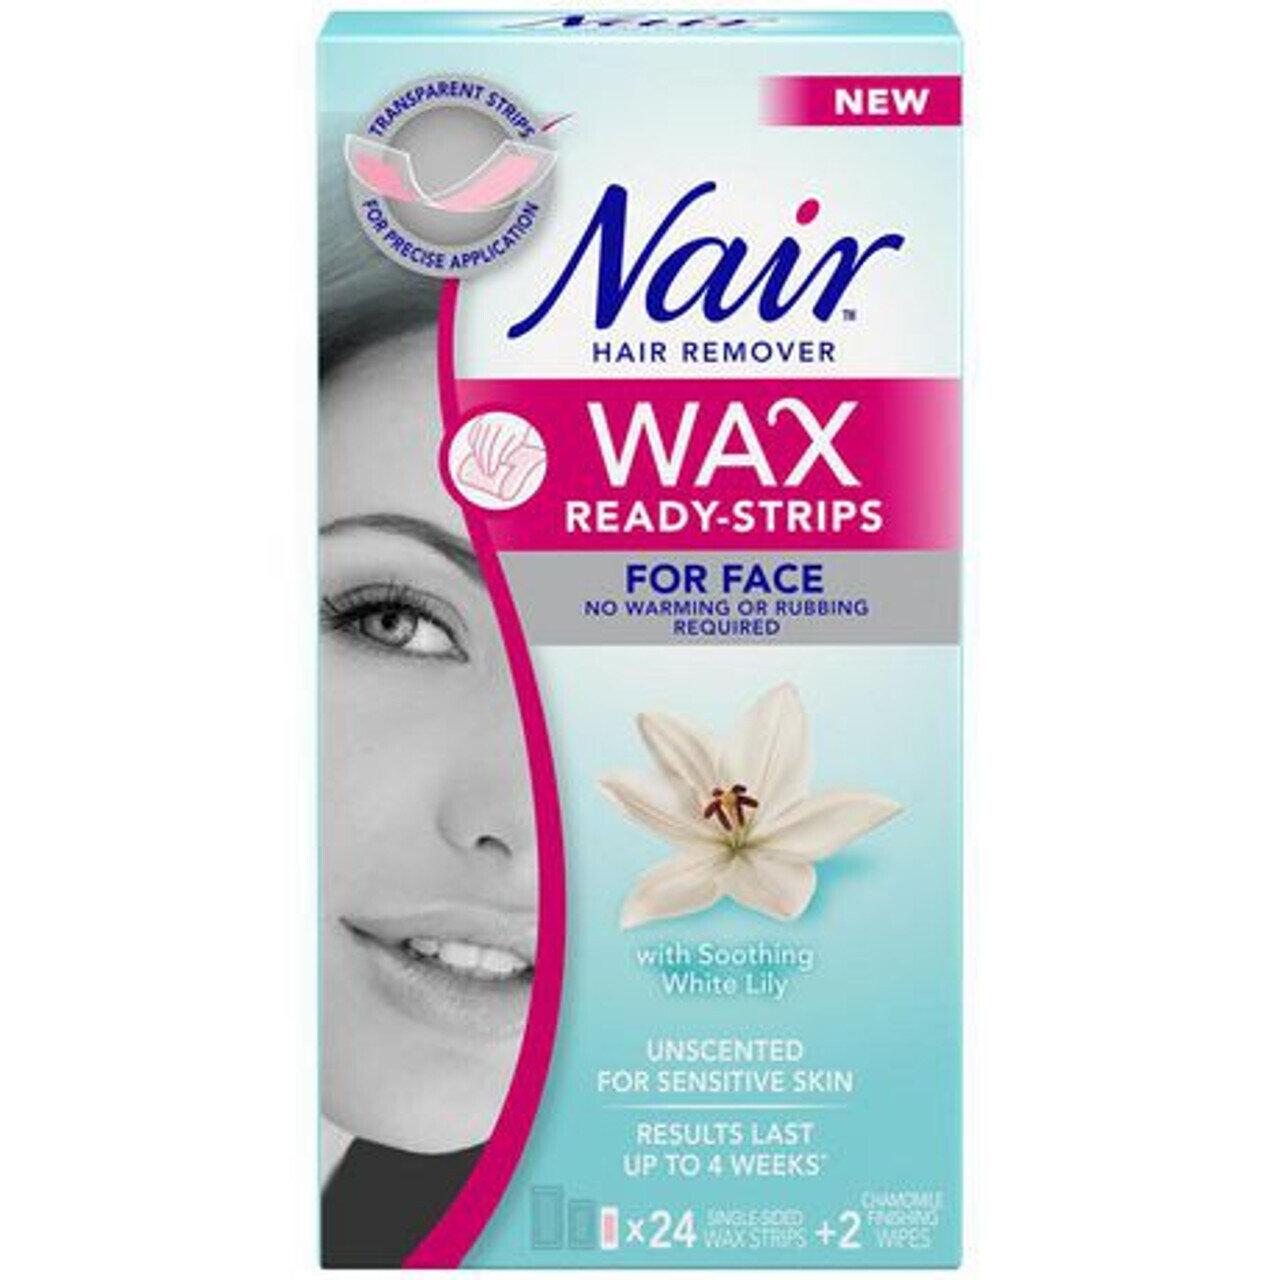 Nair Hair Remover Wax Ready-Strips for Face 24 Single Sided Wax Strips